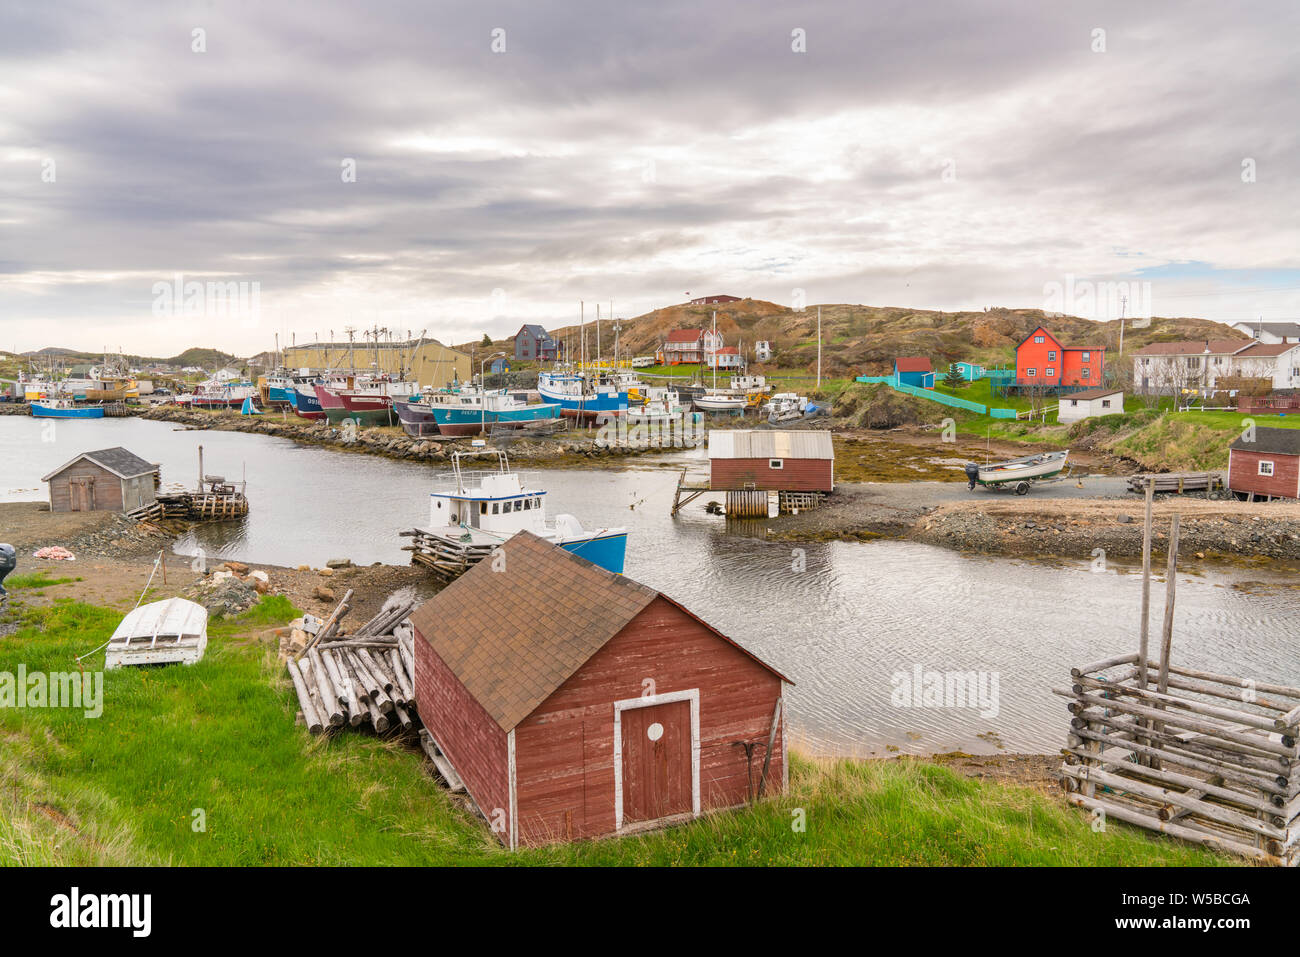 Jenkins Cove, Newfoundland - June 13, 2019: Boats and sheds in the harbor of Farmers Arm near Jenkins Cove, Newfoundland, Canada Stock Photo